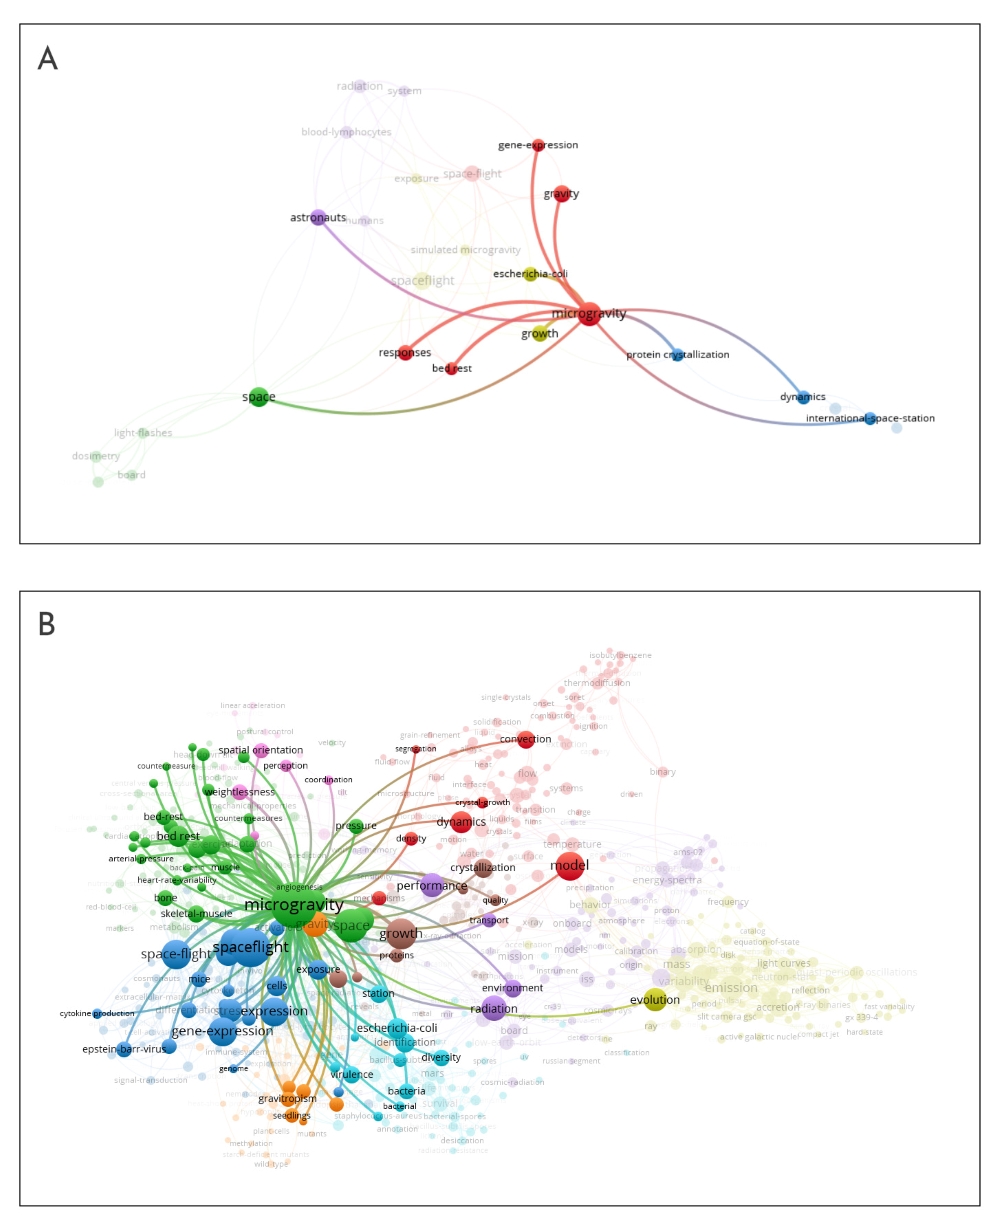 image of two graphs showing diversity in disciplines